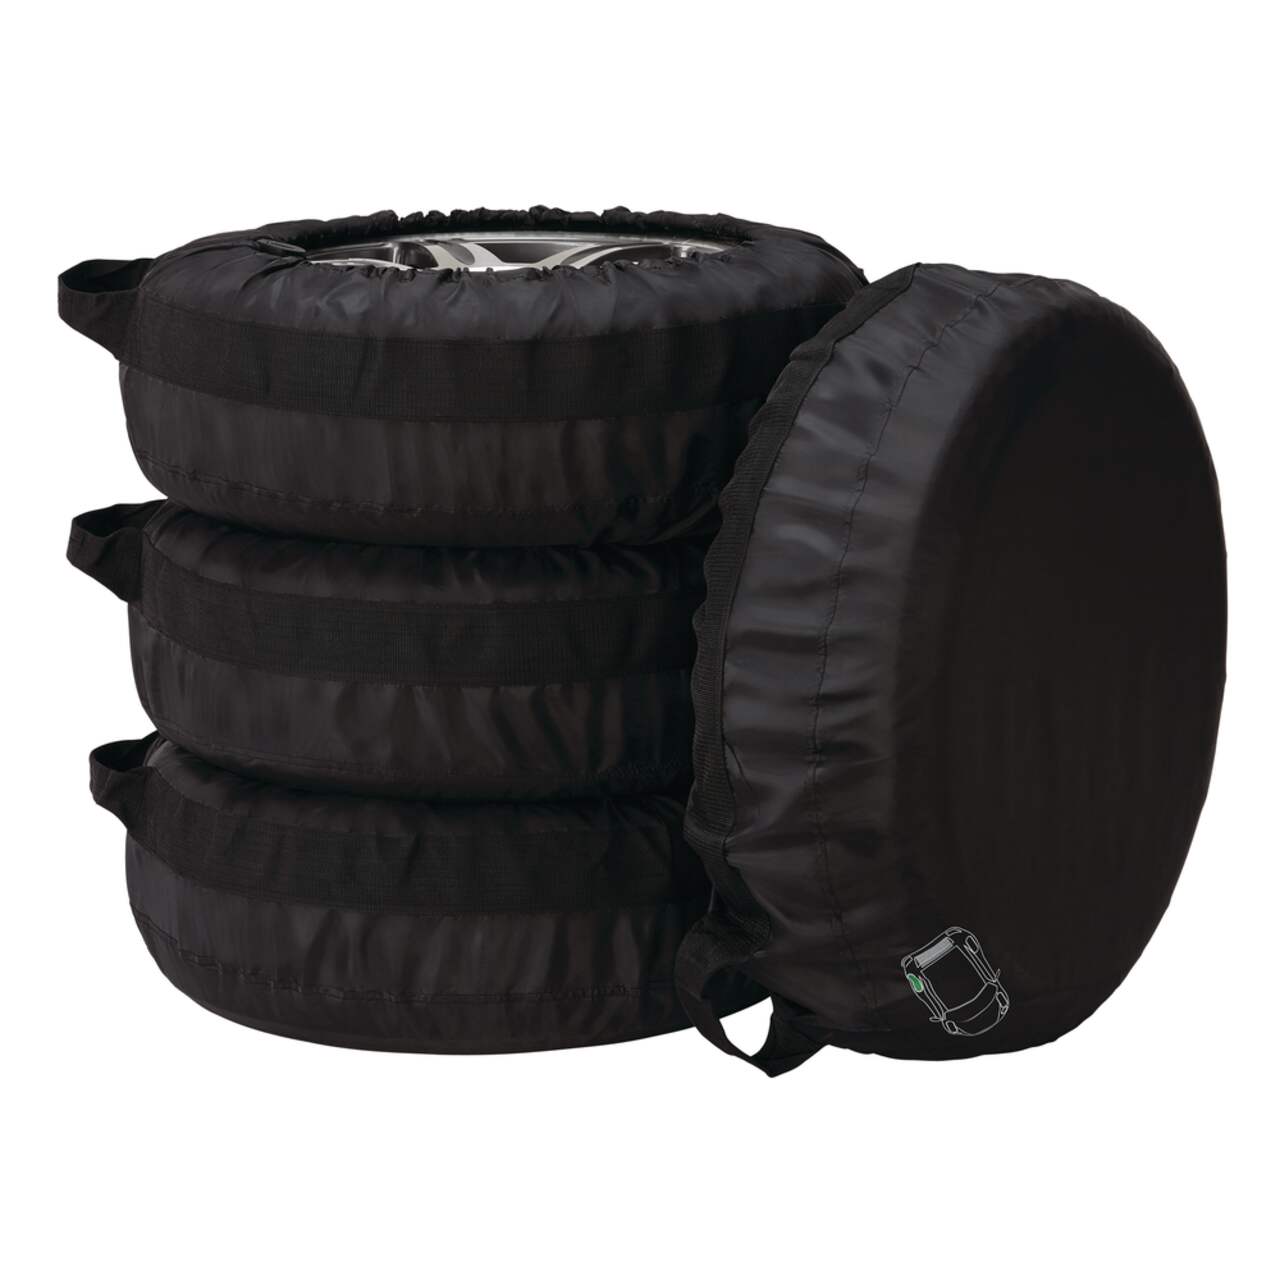 Certified Tire Covers, Large, 4-pk